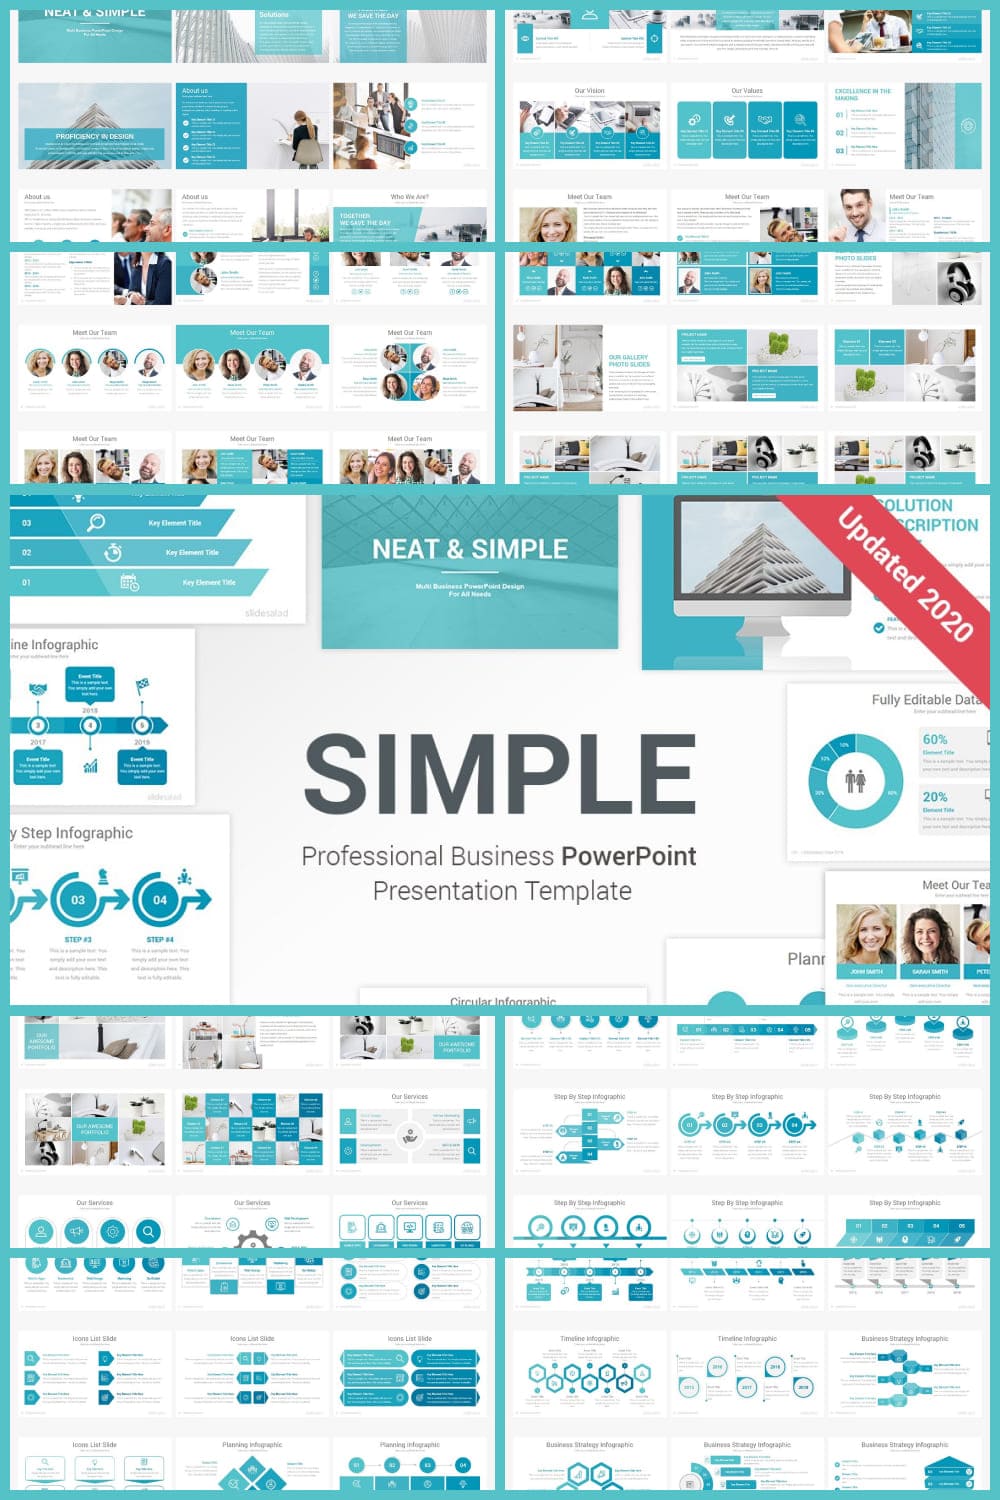 Simple & Modern PowerPoint Template Collage image.